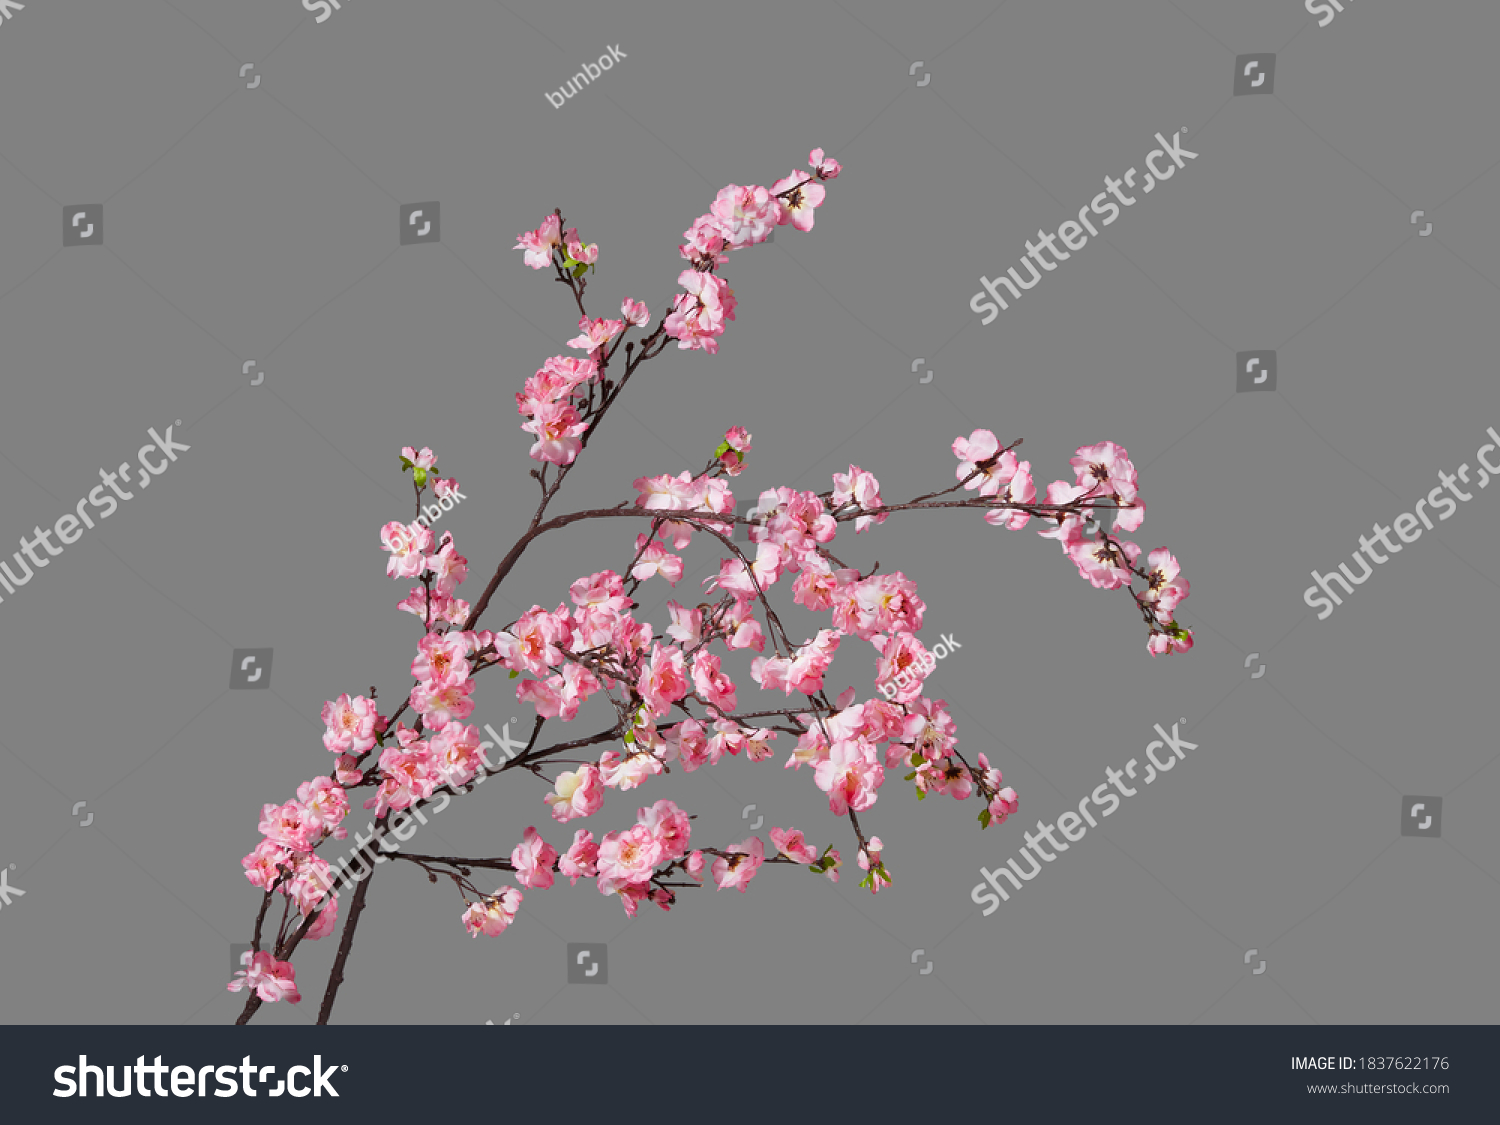 Fake peach blossom branch  to decorate for celebrating Lunar New Year. It's also called Tet holidays in Vietnam, isolated on gray background #1837622176